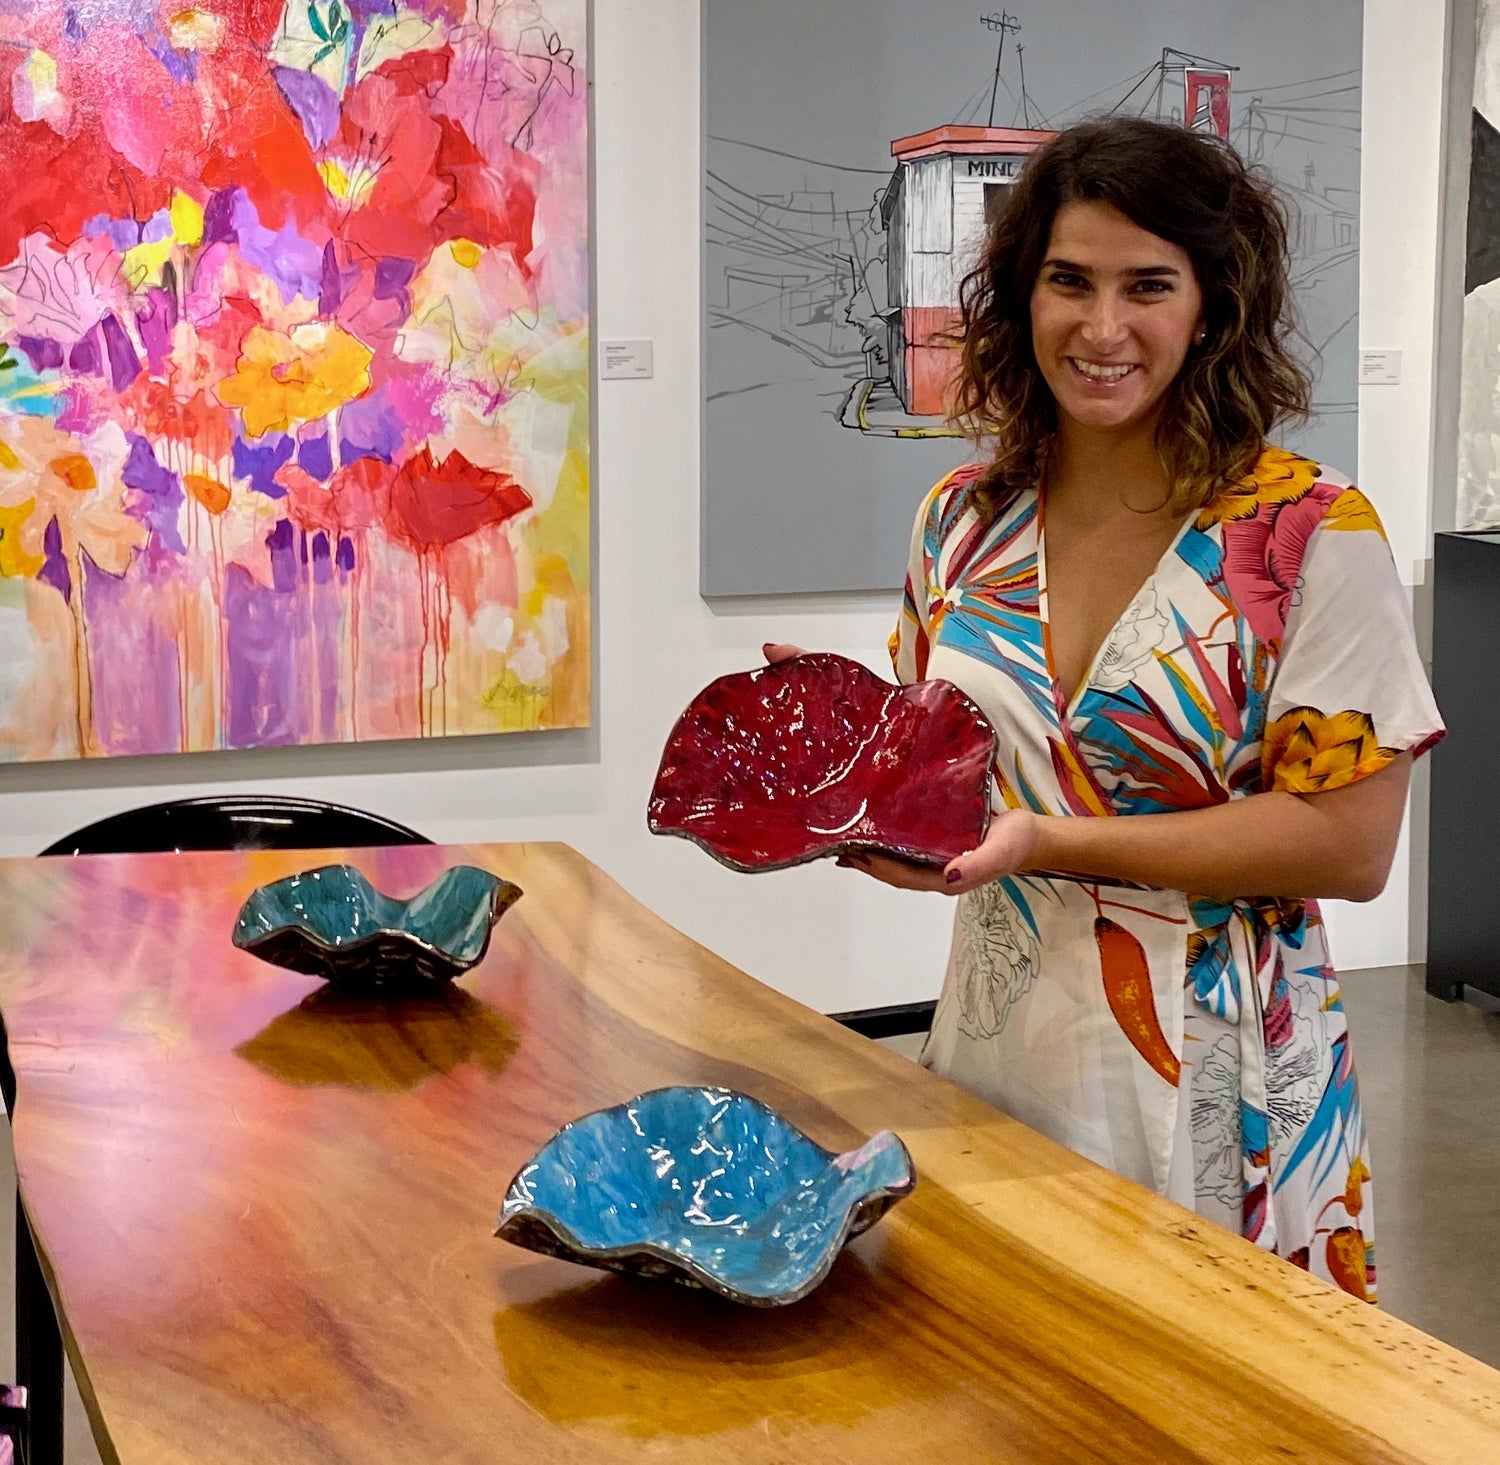 Woman in art gallery holding medium size red decorative ceramic bowl